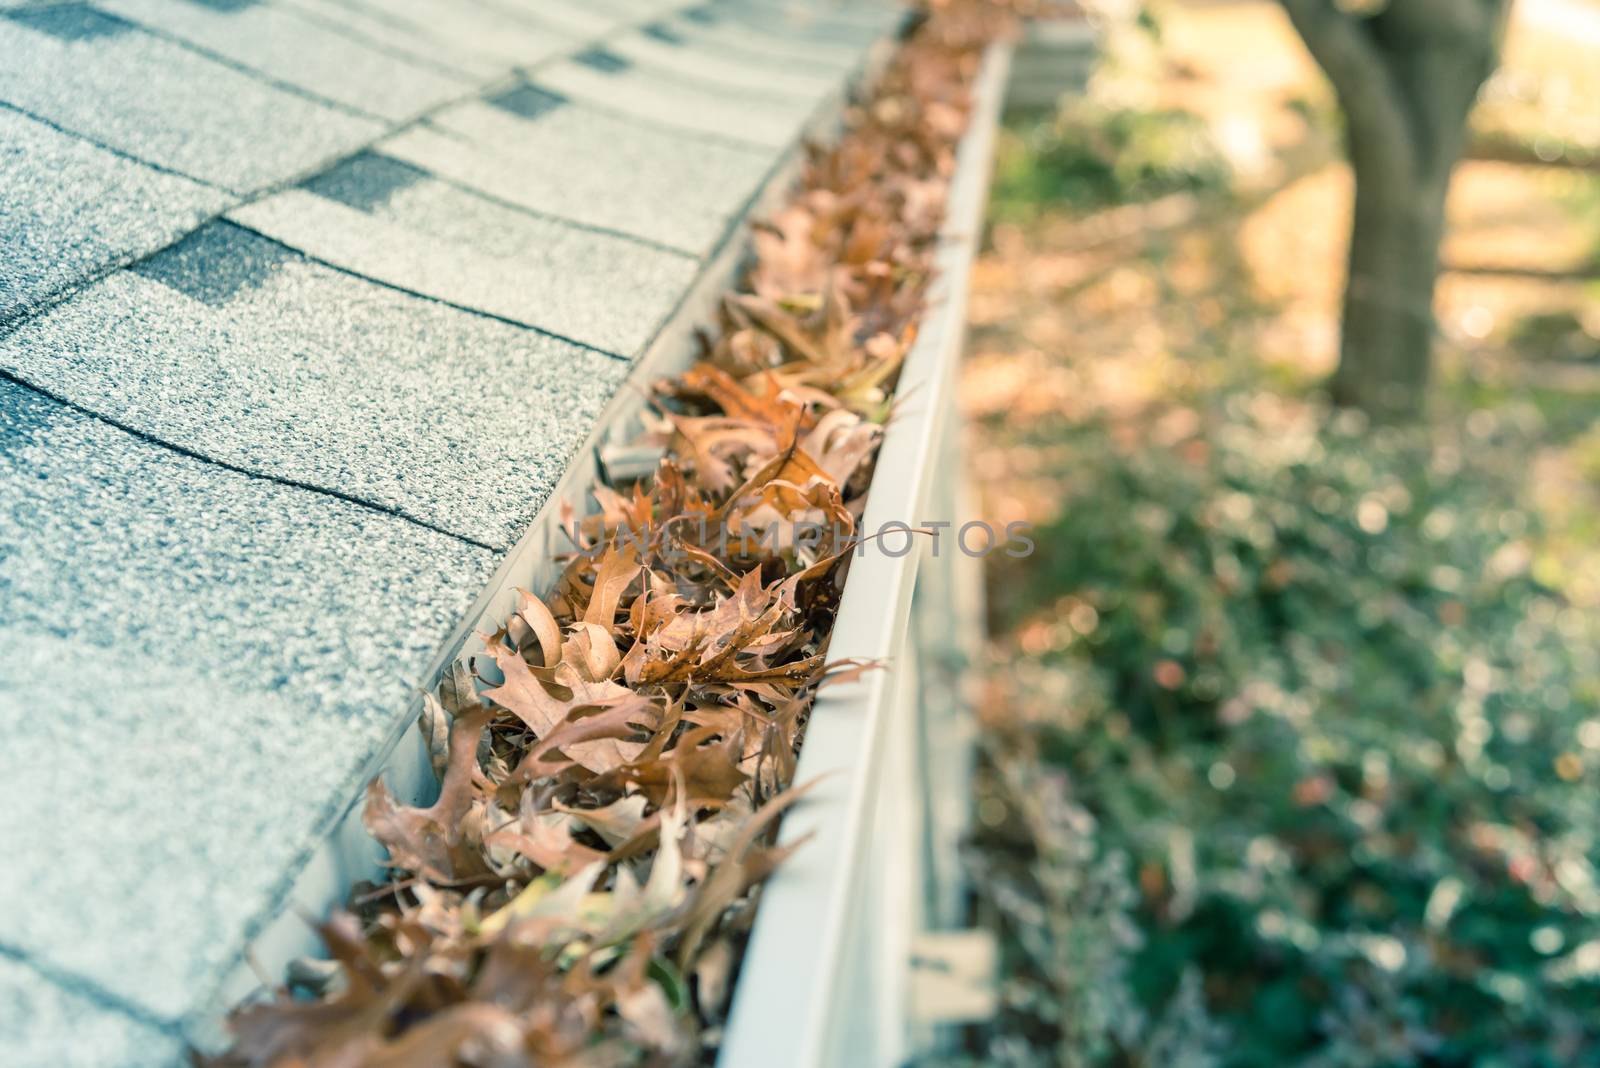 Front yard clogged gutter near roof shingles of residential house full of dried leaves and dirty need to clean-up. Blocked drain pipe on rooftop. Gutter cleaning and home maintenance concept